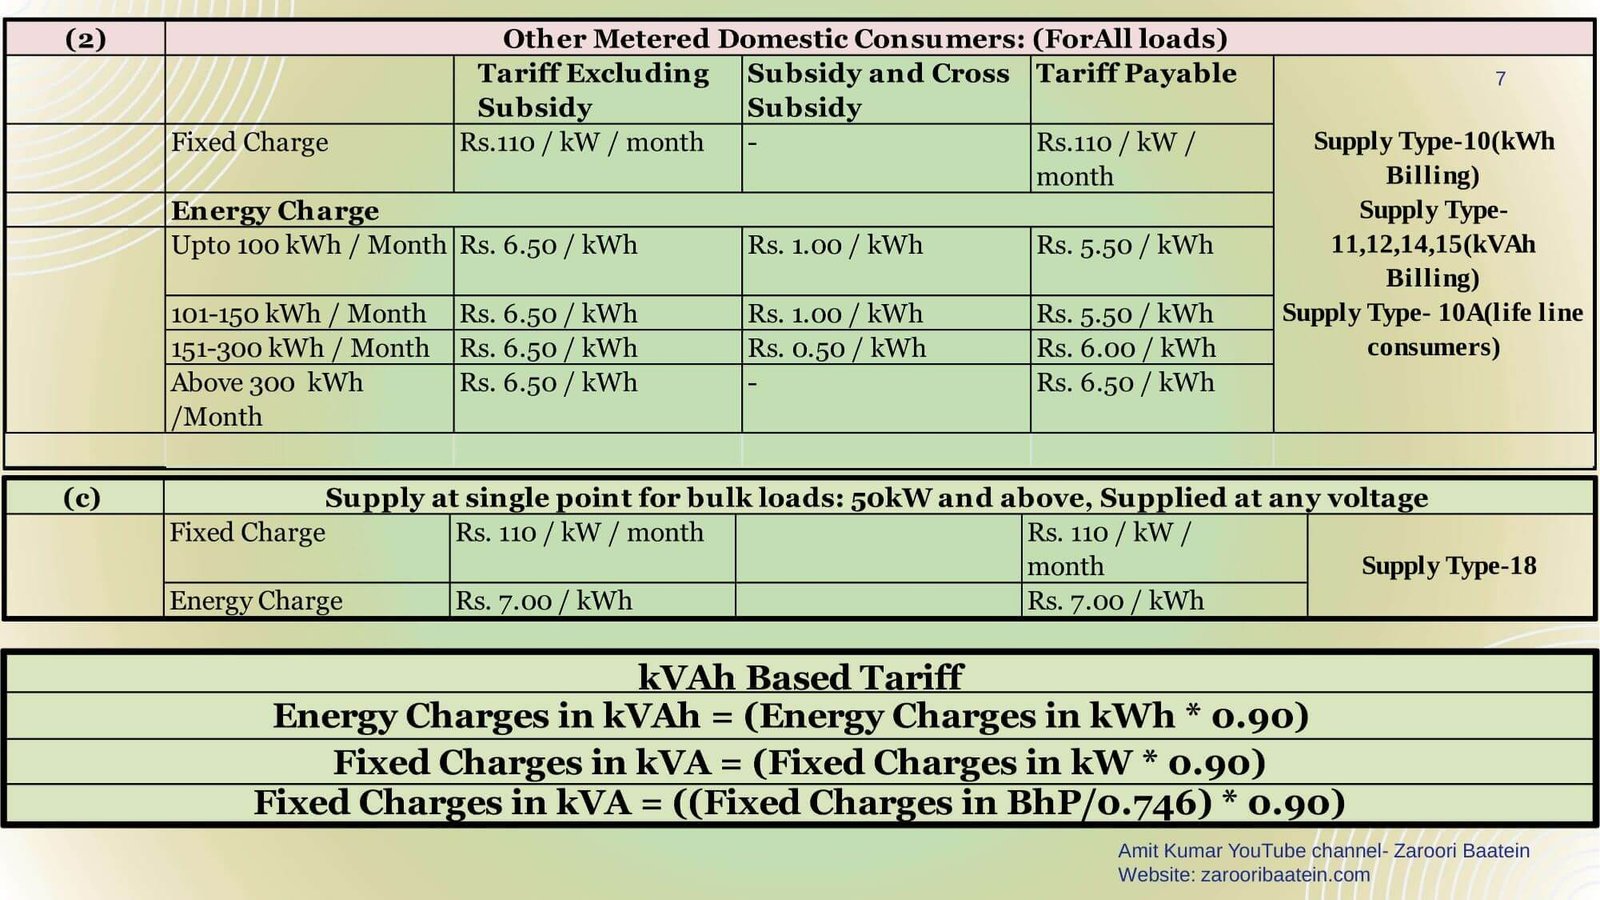 Unit Rate of Supply Type 10, 11, 12,14,15,18  and kVAh billing formula